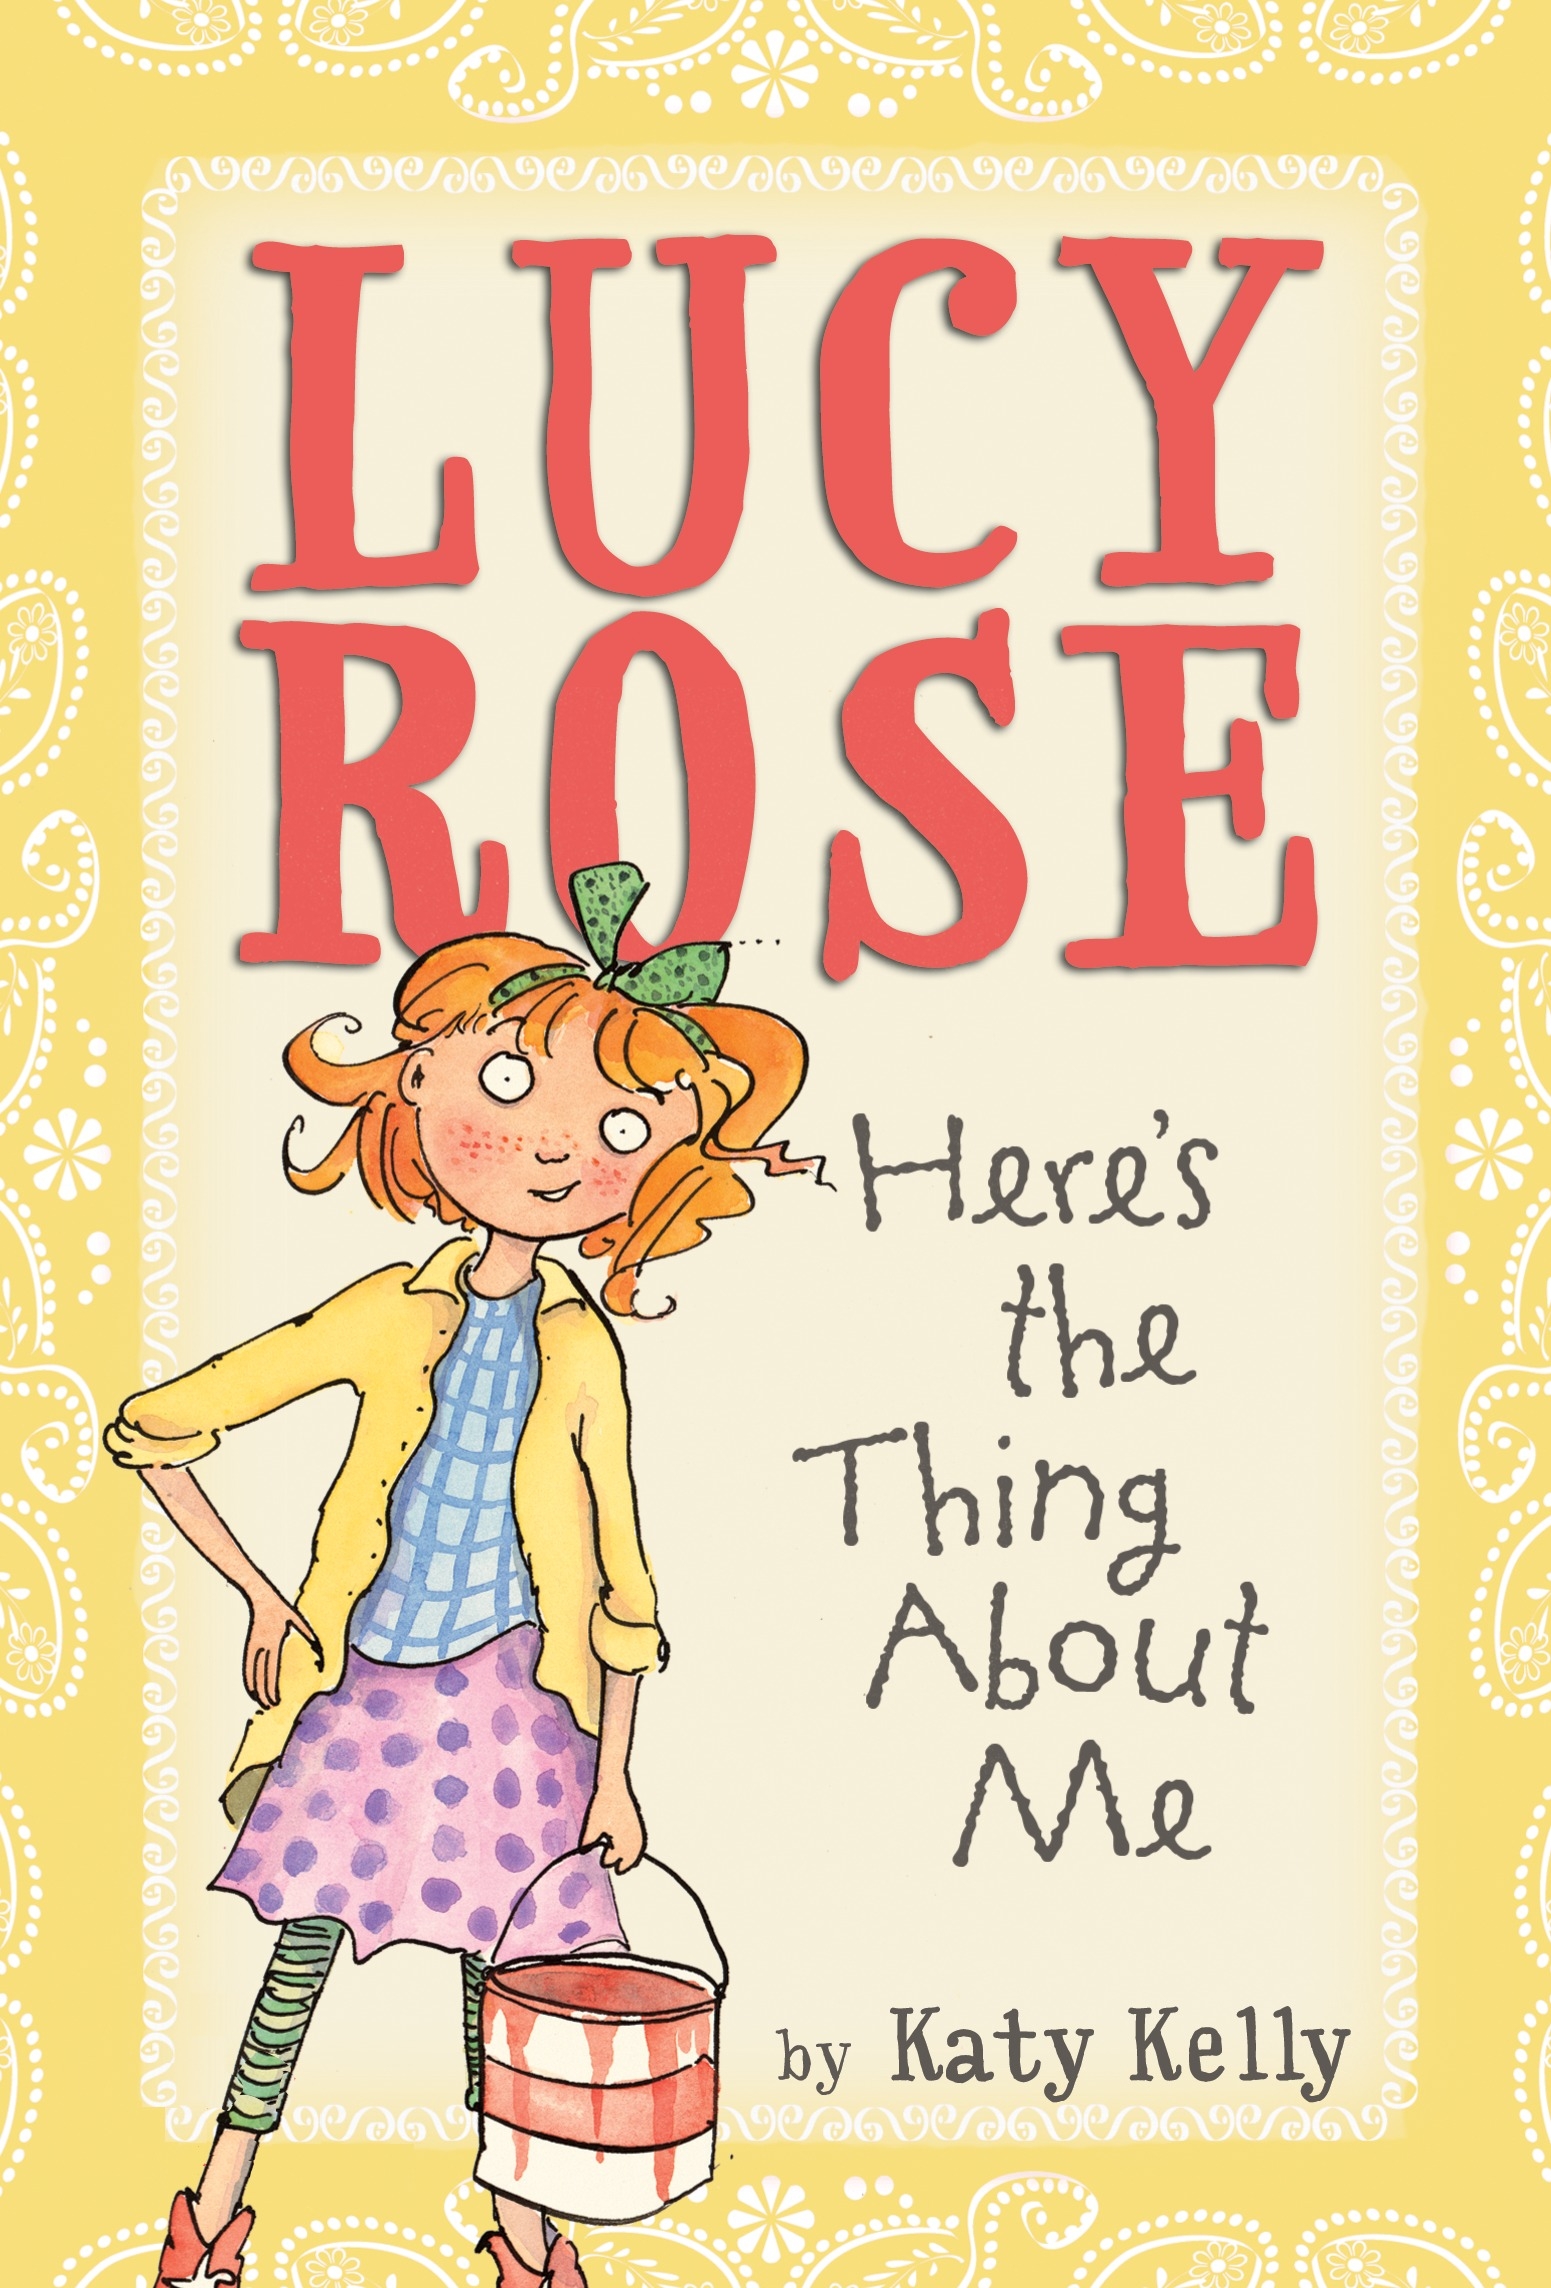 Lucy Rose By Katy Kelly Penguin Books New Zealand 